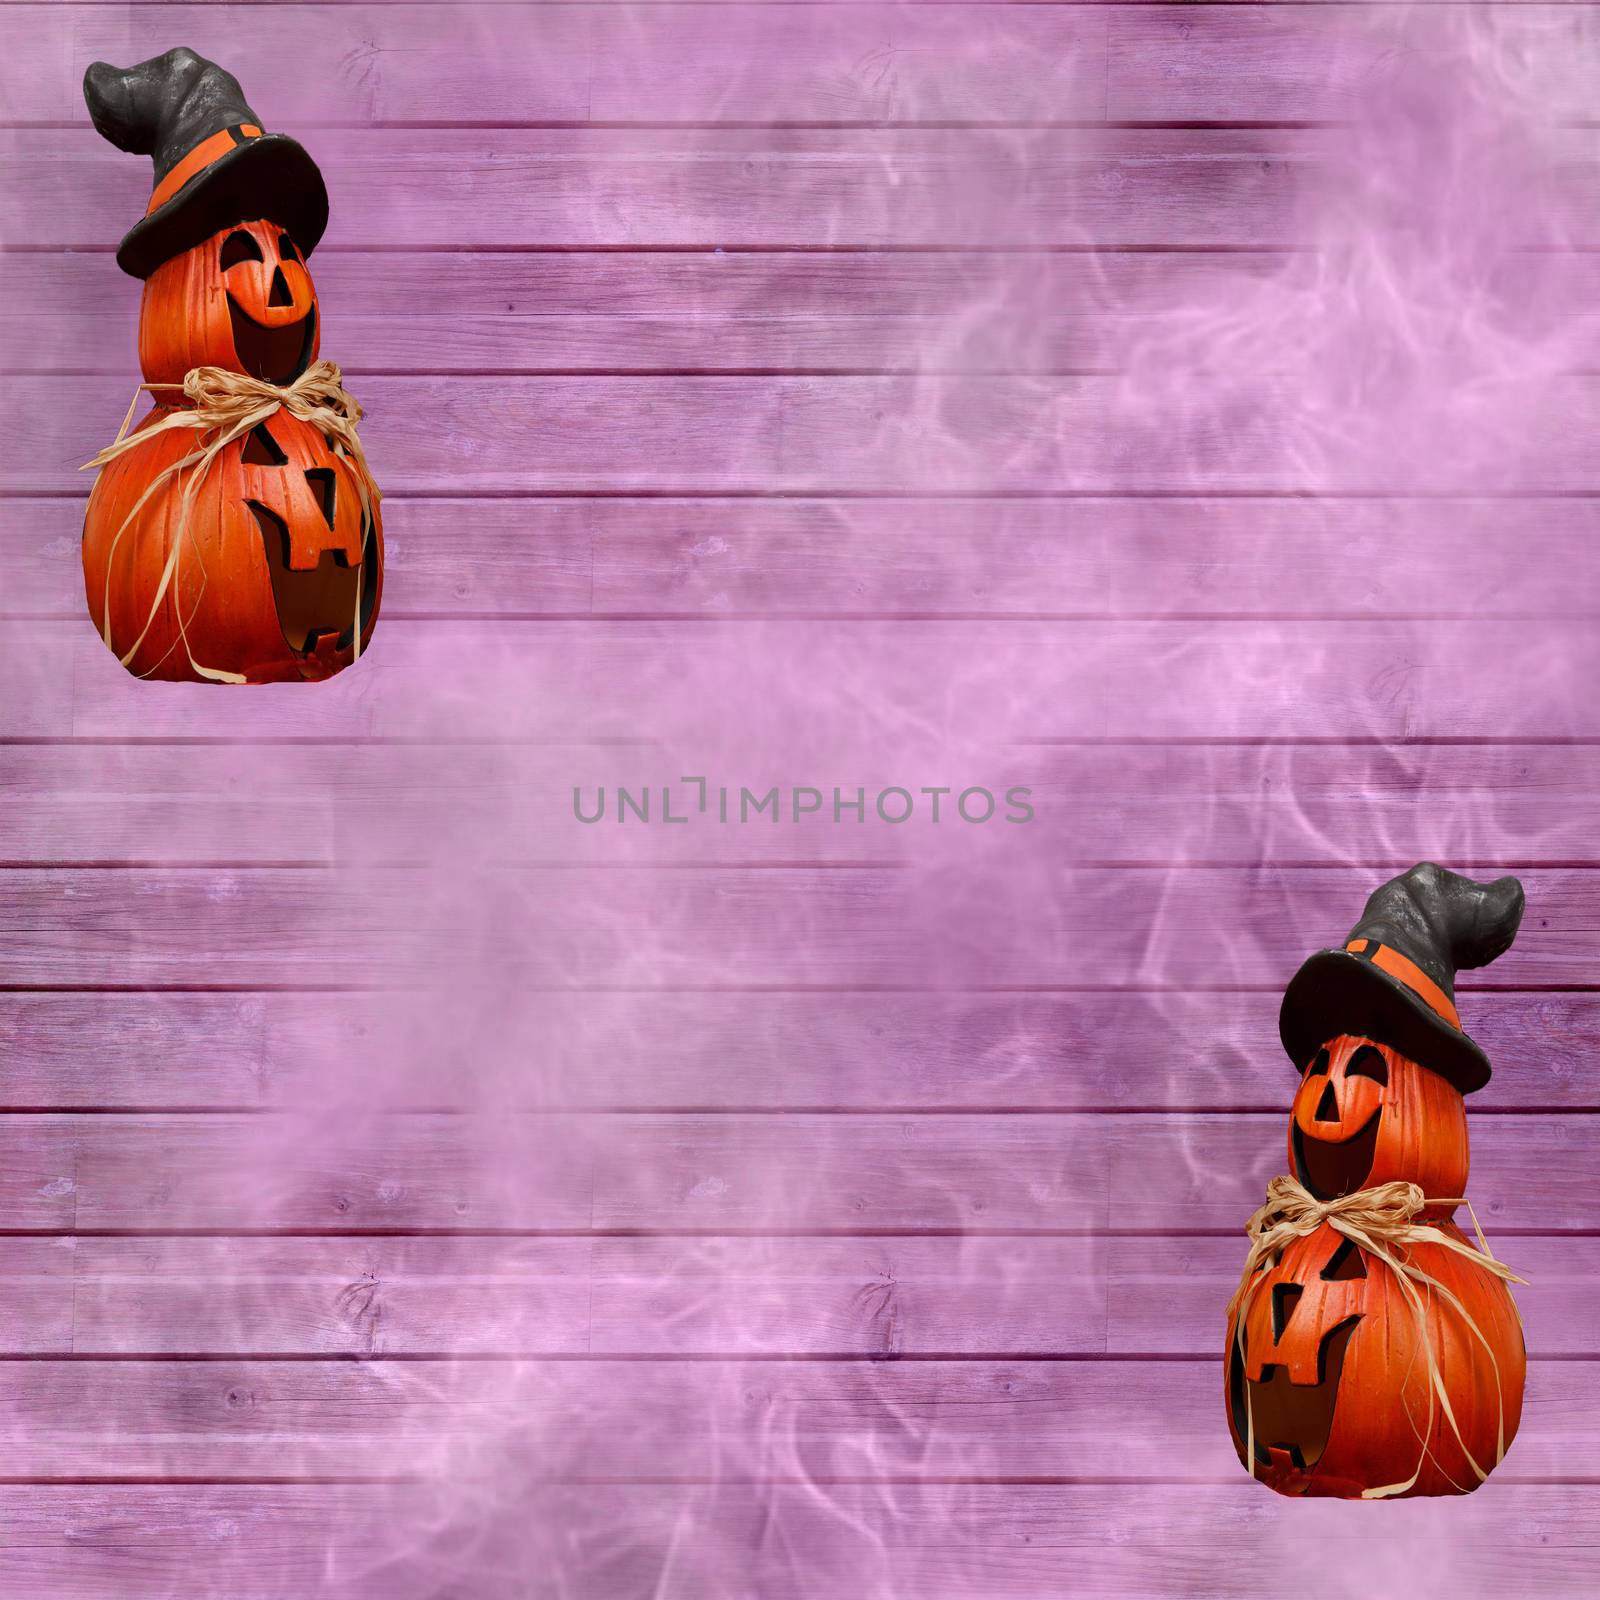 Halloween celebration background with purple wooden planks and carved pumpkins with a witch hat by charlottebleijenberg